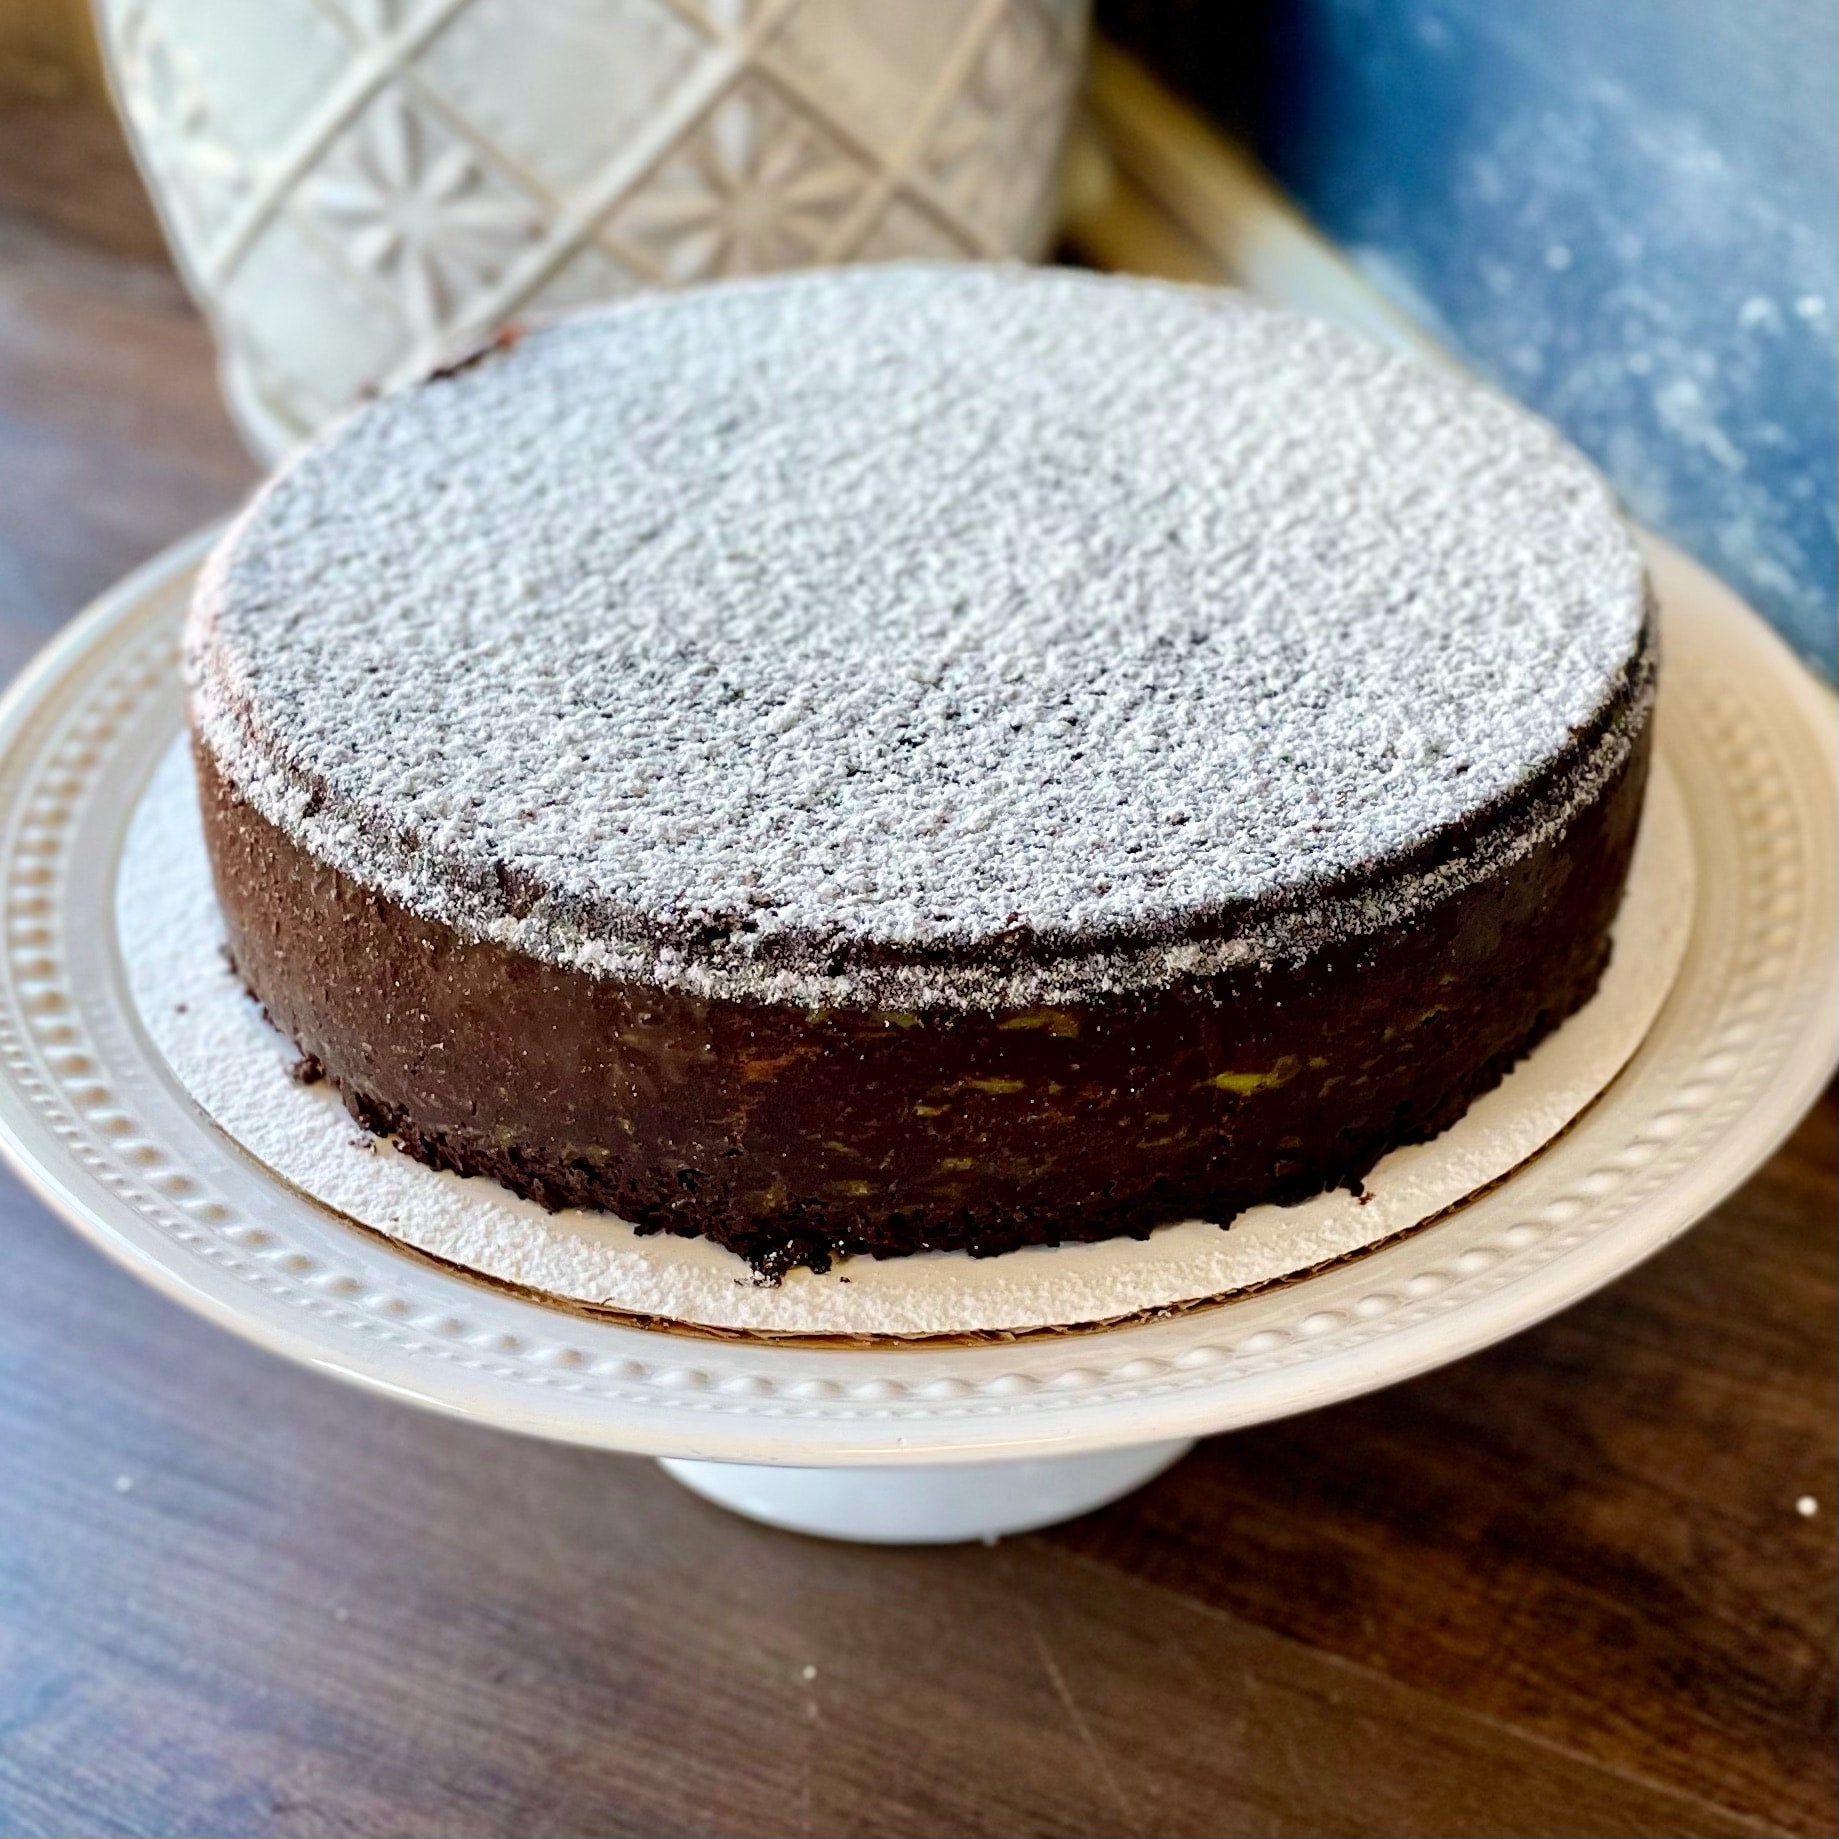 What You Need to Know about Baking a Keto Coconut Cake